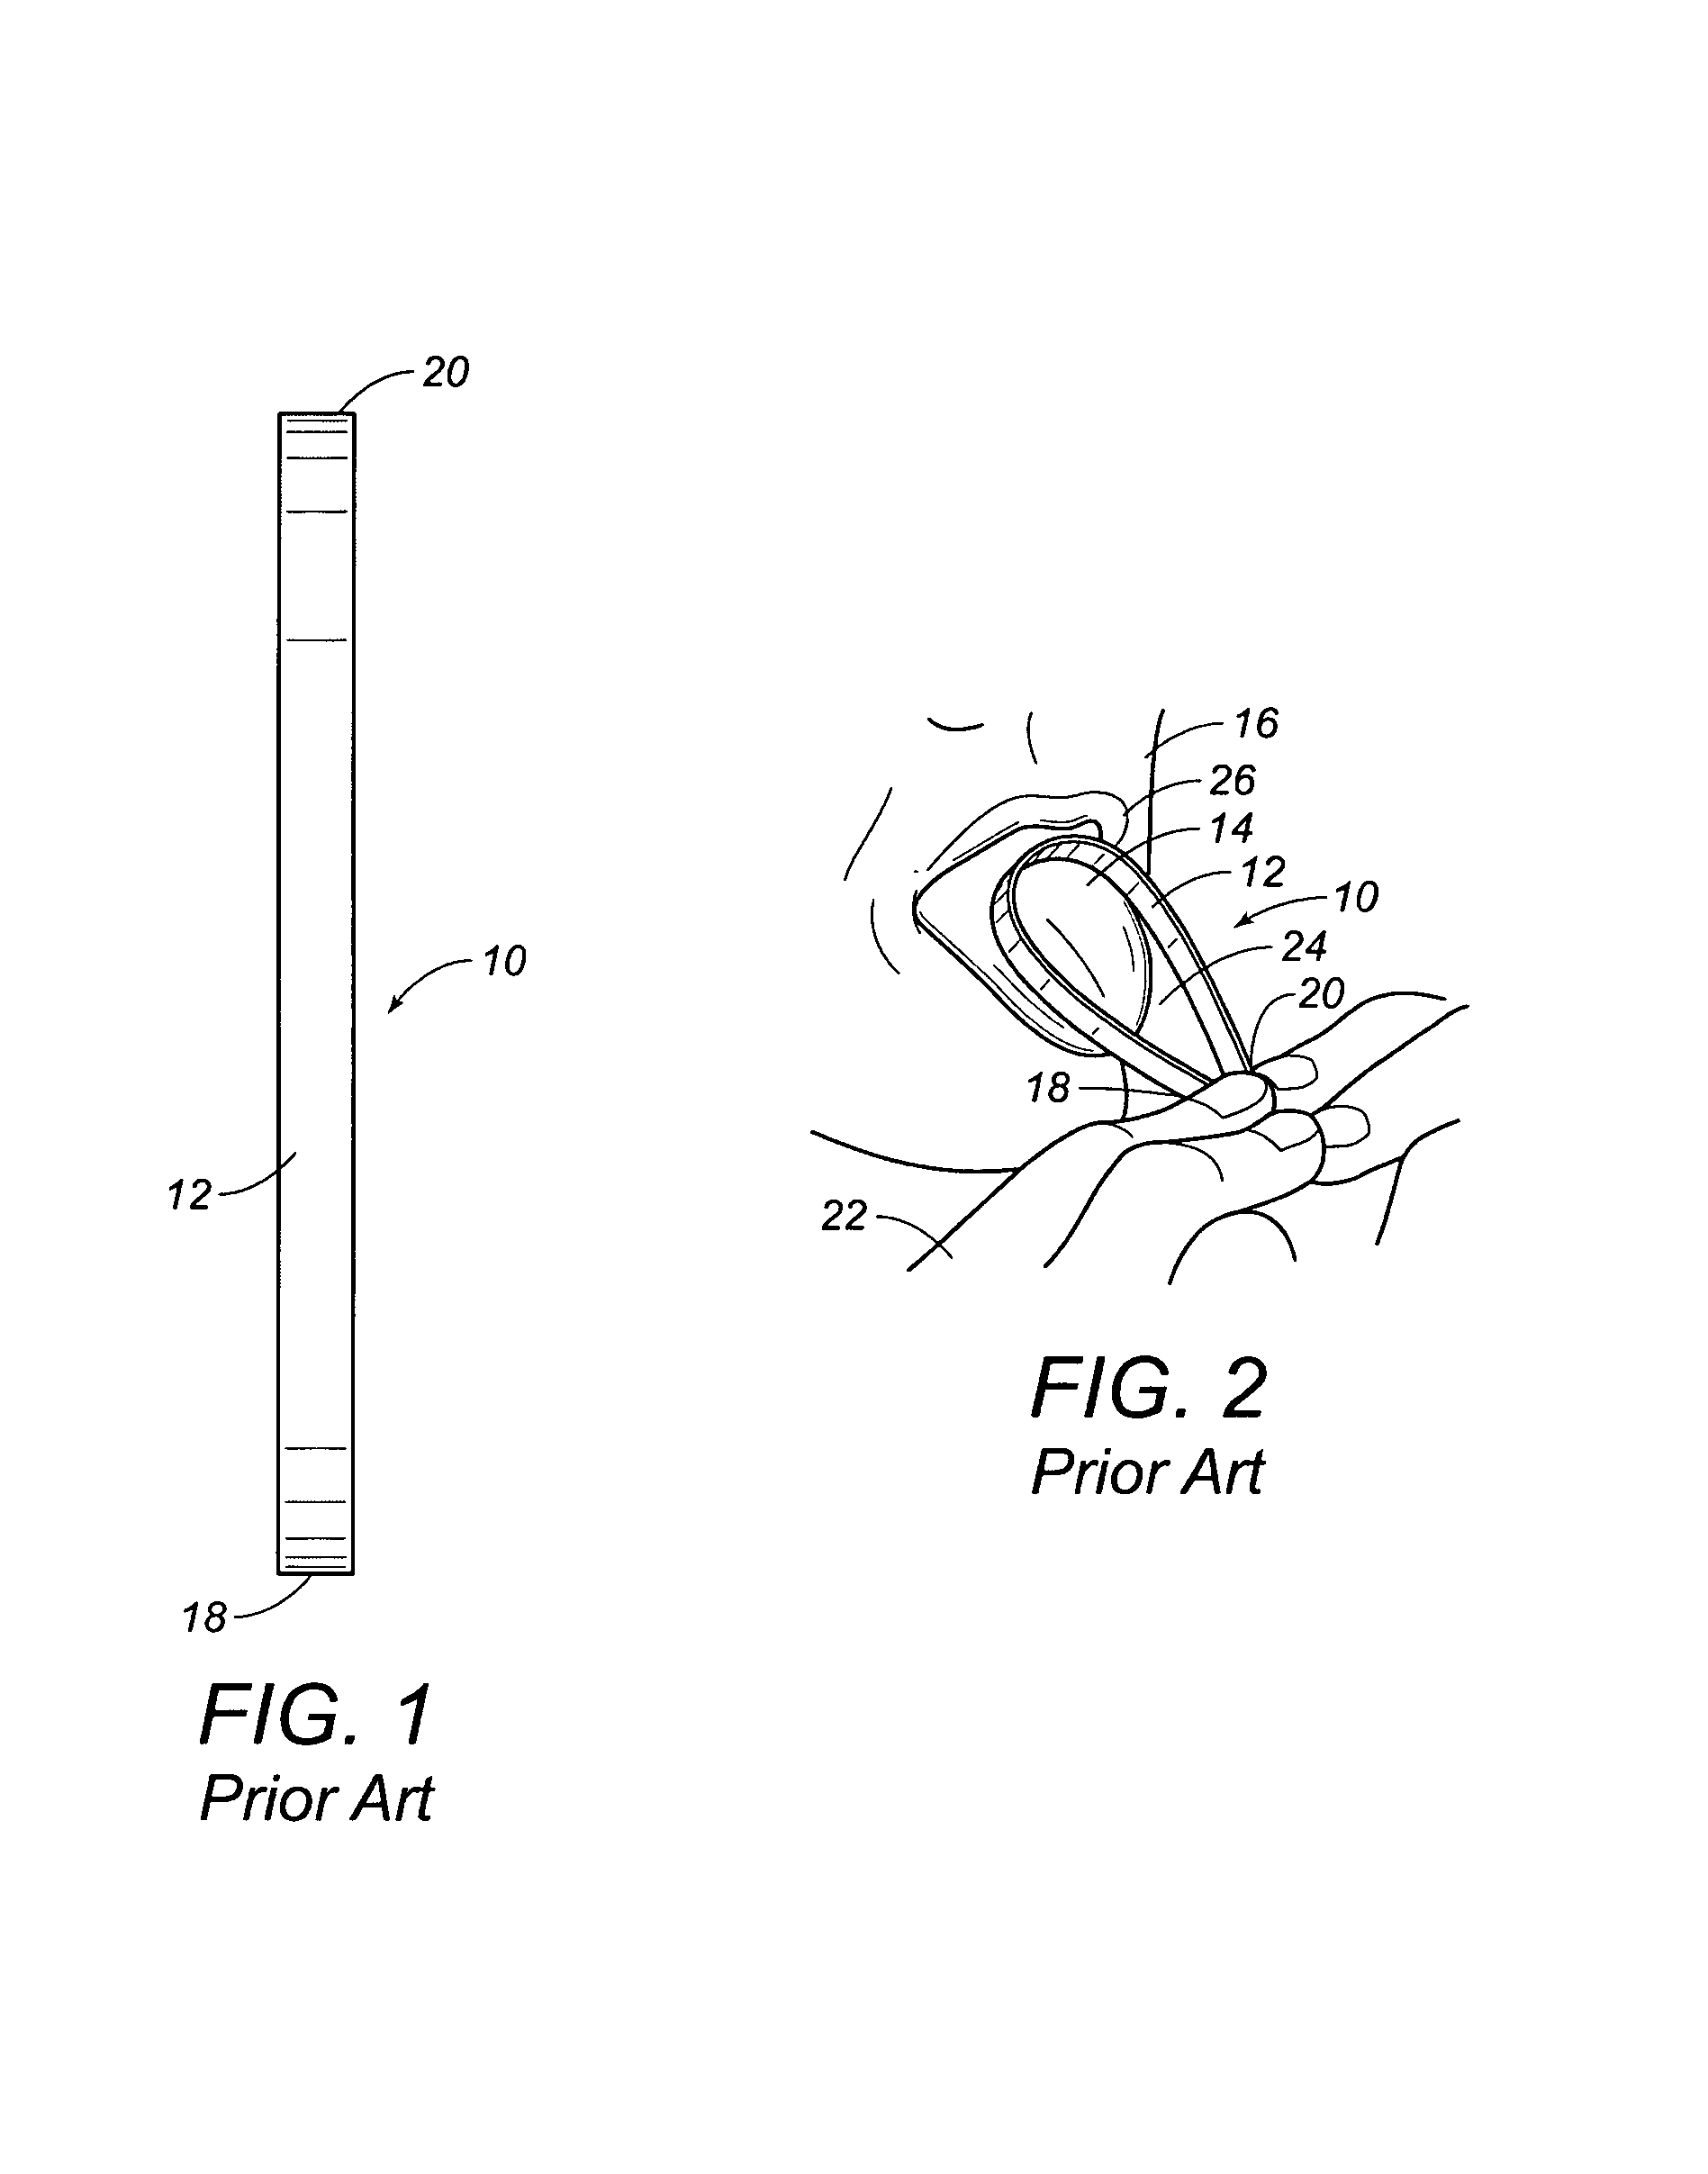 Tongue cleaner apparatus with an abrasive tablet